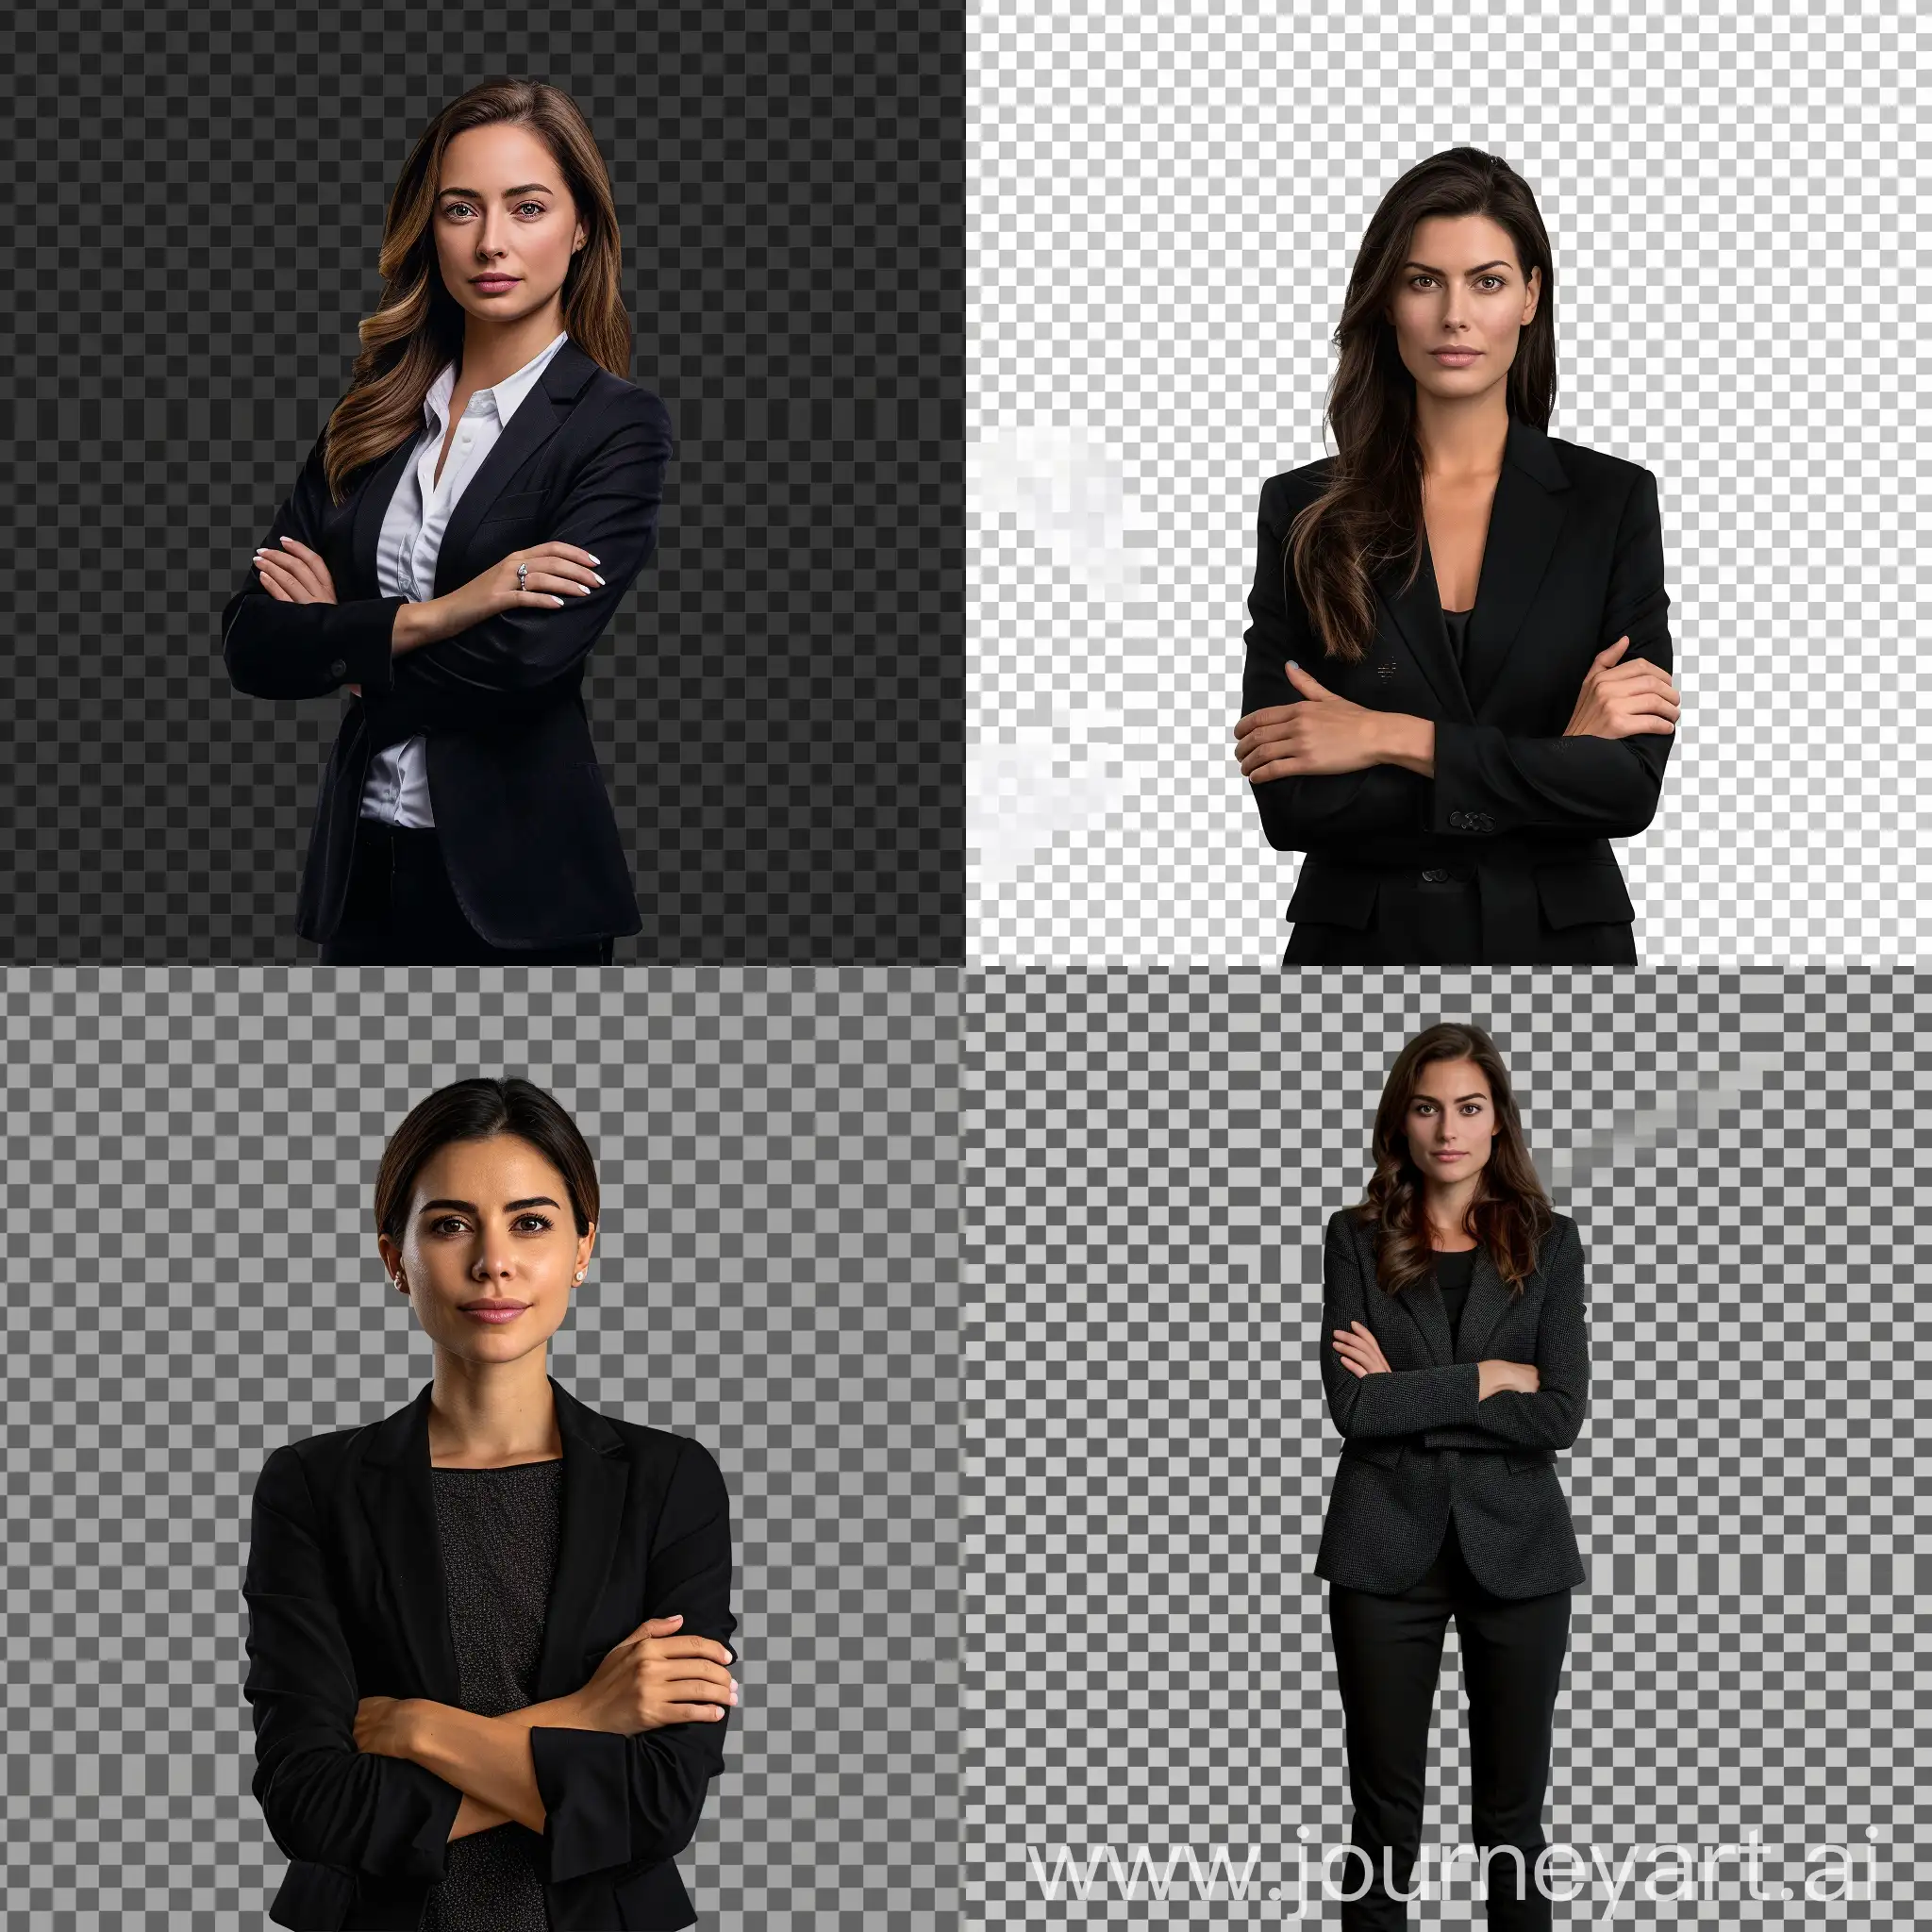 Create a portrait of a woman news presenter realistic without background png (or dark), real person, full body standing in the middle of the image, normal expression with fingers crossed on front, use a front-facing photo with clear lighting (no shadows).